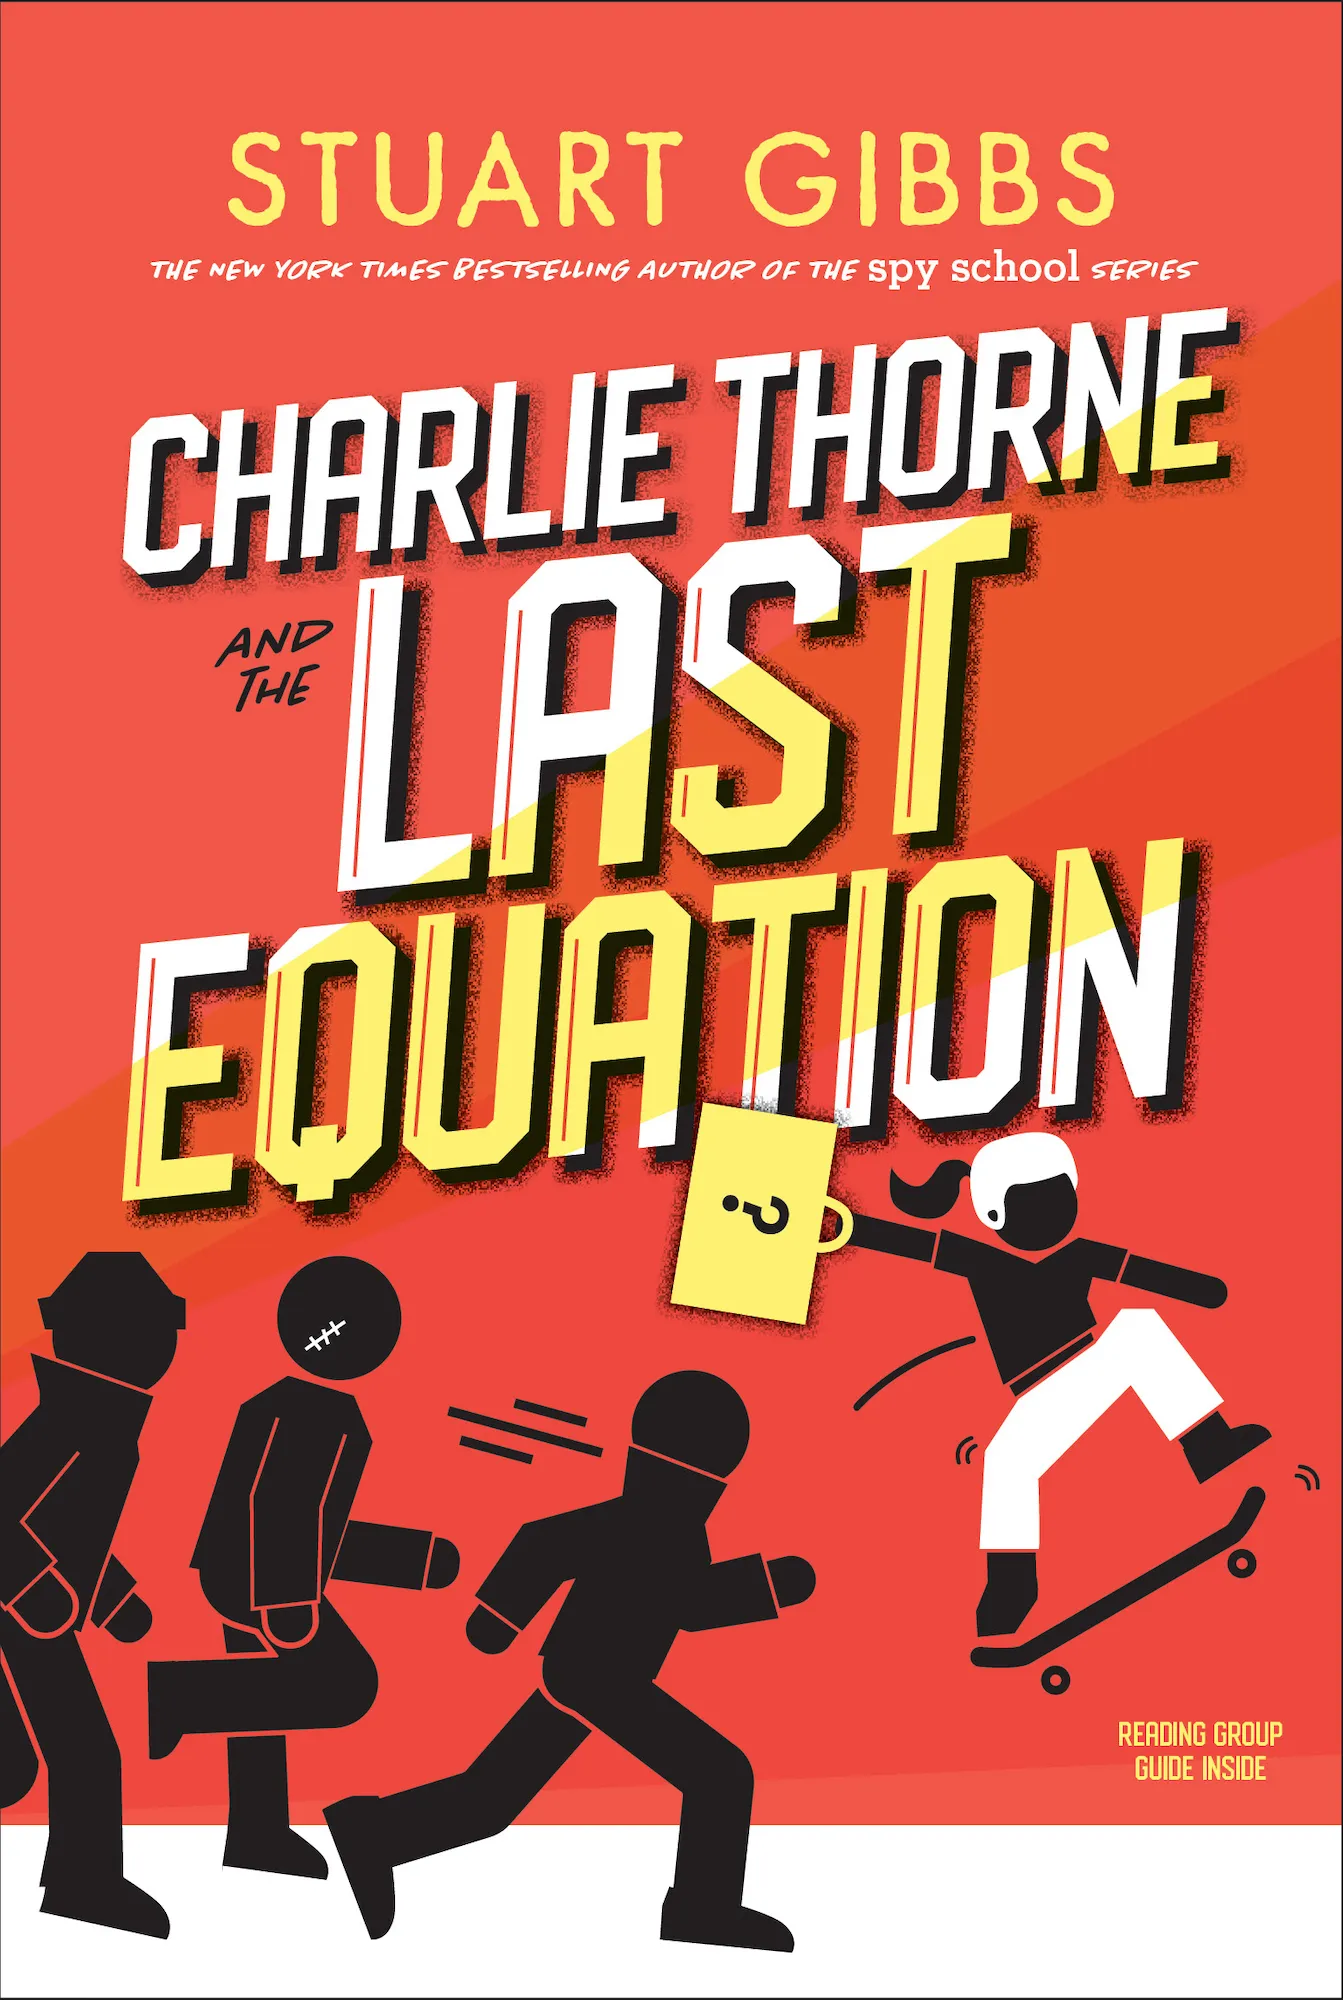 Charlie Thorne and the Last Equation (Charlie Thorne #1)